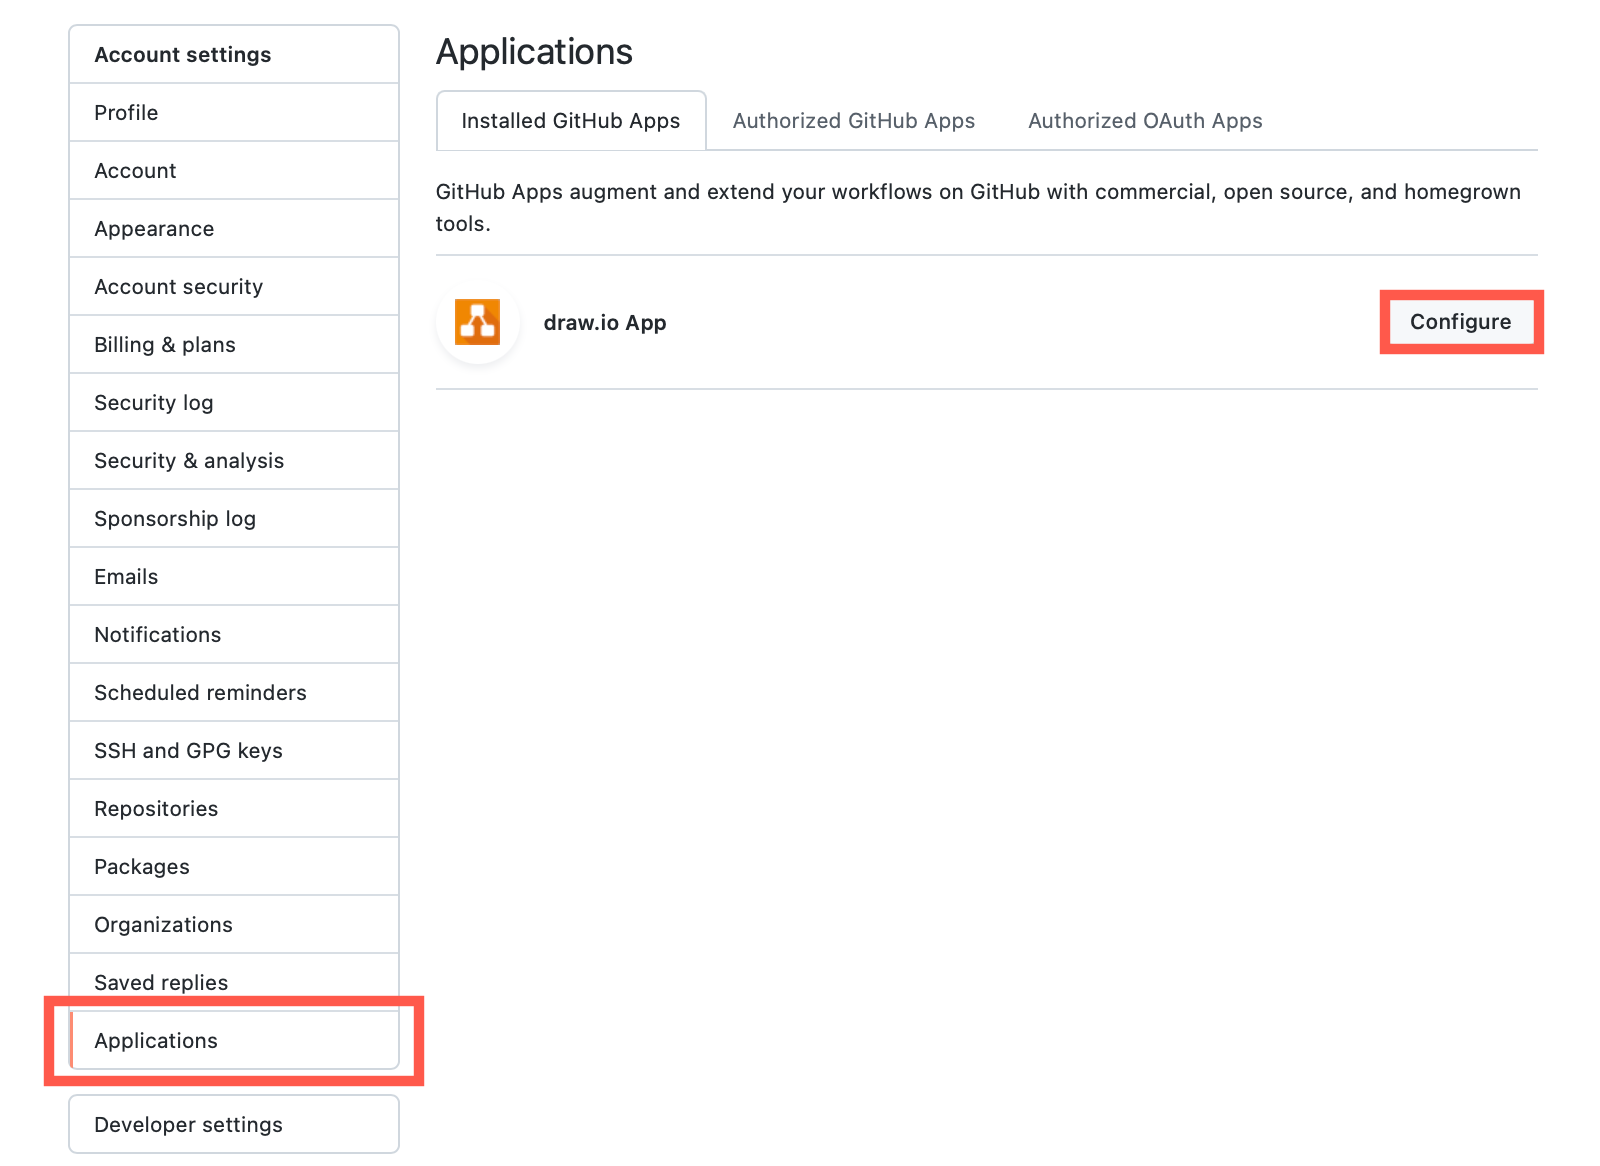 Go to the Application settings in your GitHub profile, and click Configure next to draw.io App to add or remove repository access